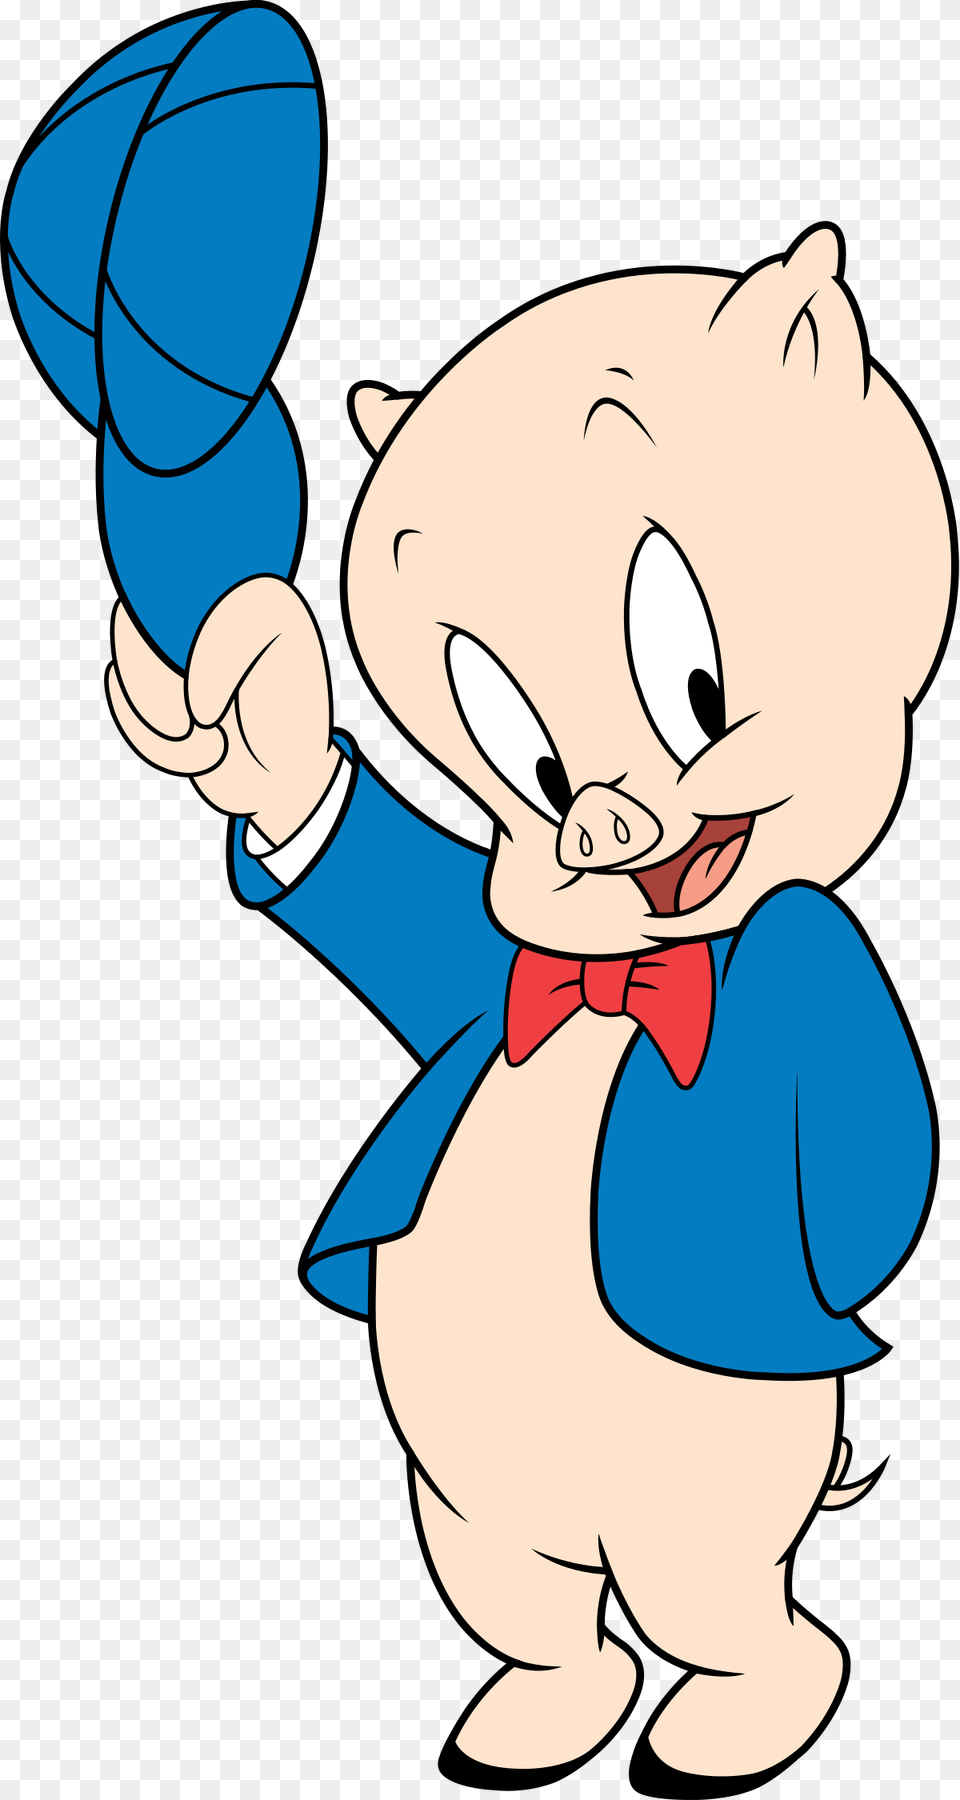 Porky Pig Pig Of Looney Tunes, Cartoon, Baby, Person Png Image